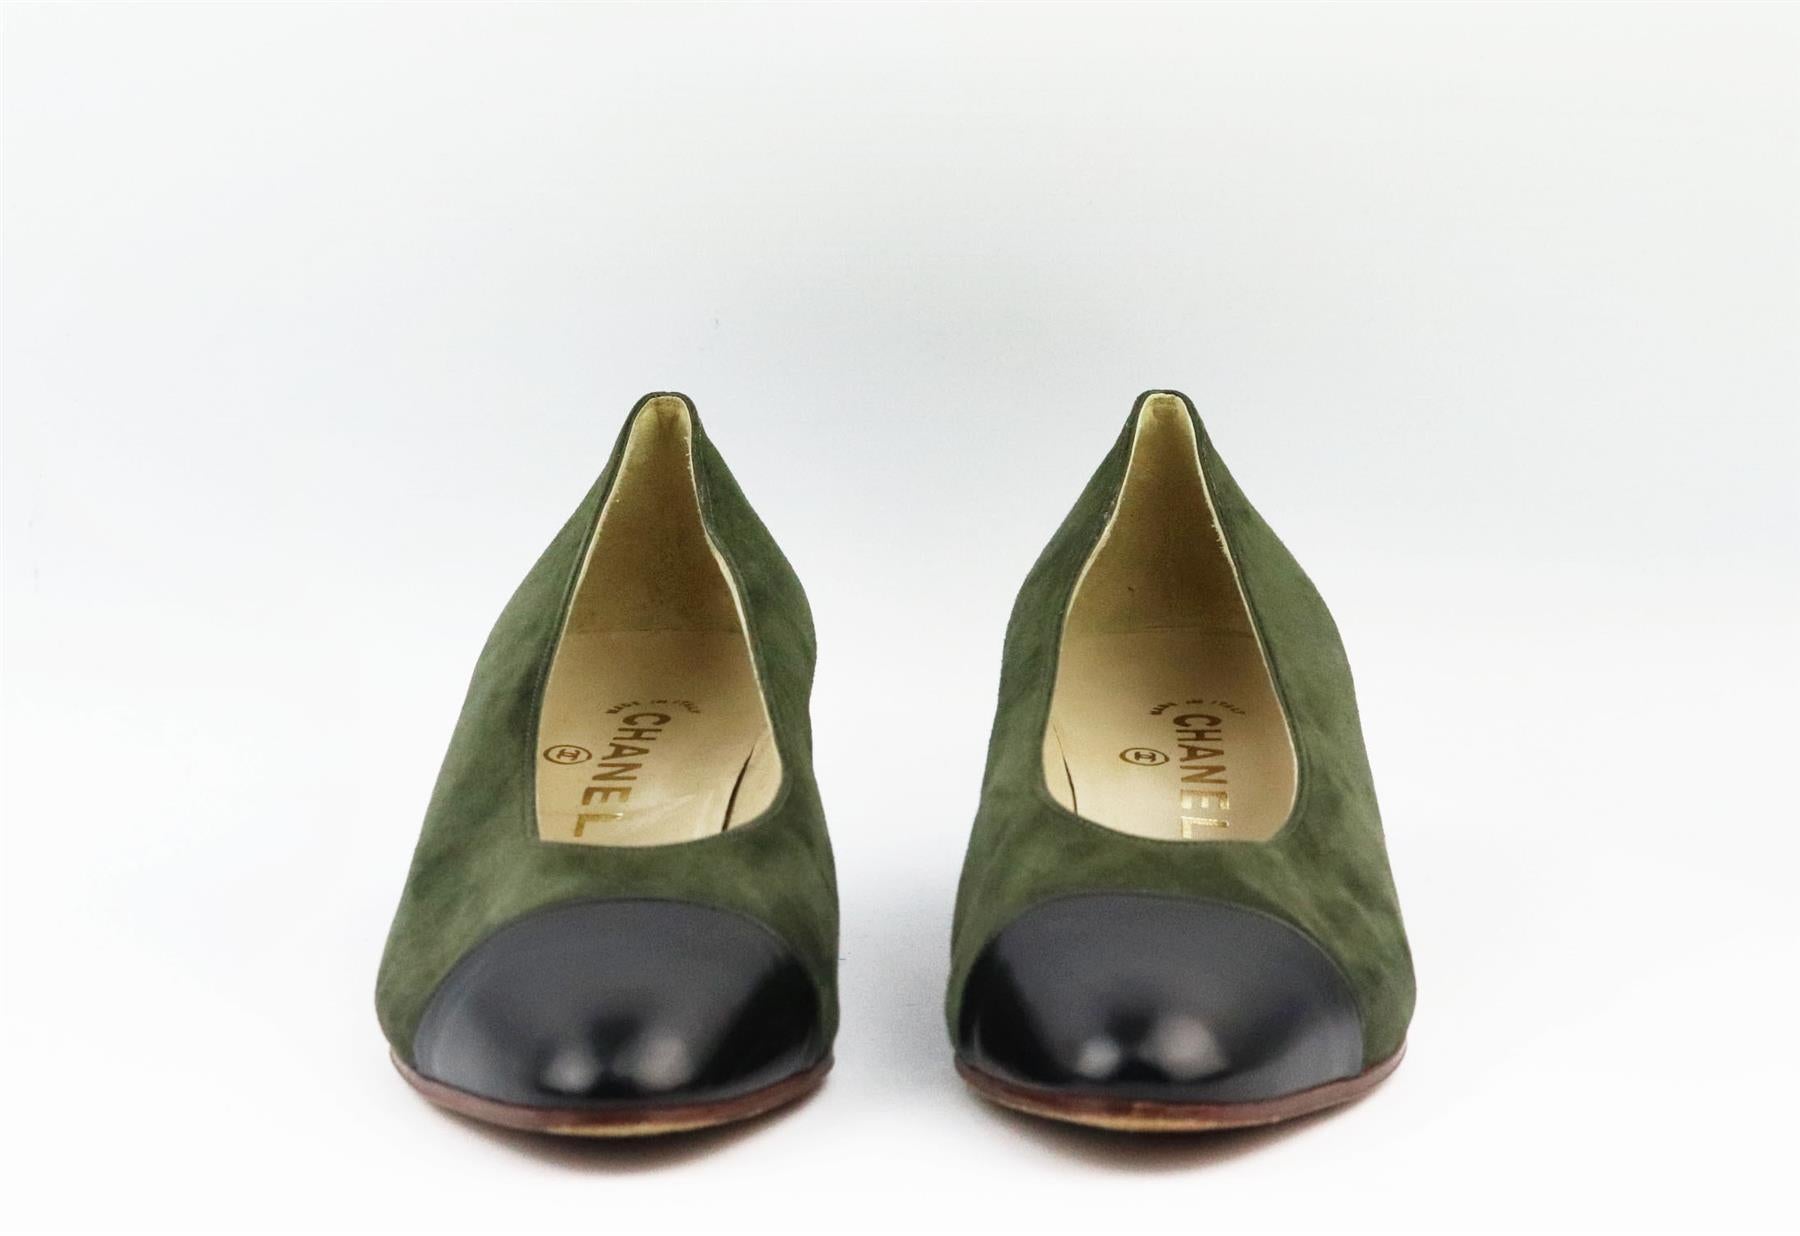 These vintage pumps by Chanel are always stand out pieces, even designs as classic as these shoes, made in Italy from green suede and black leather toe cap that are balanced out with an almond toe. Sole measures approximately 38 mm/ 1.5 inches.